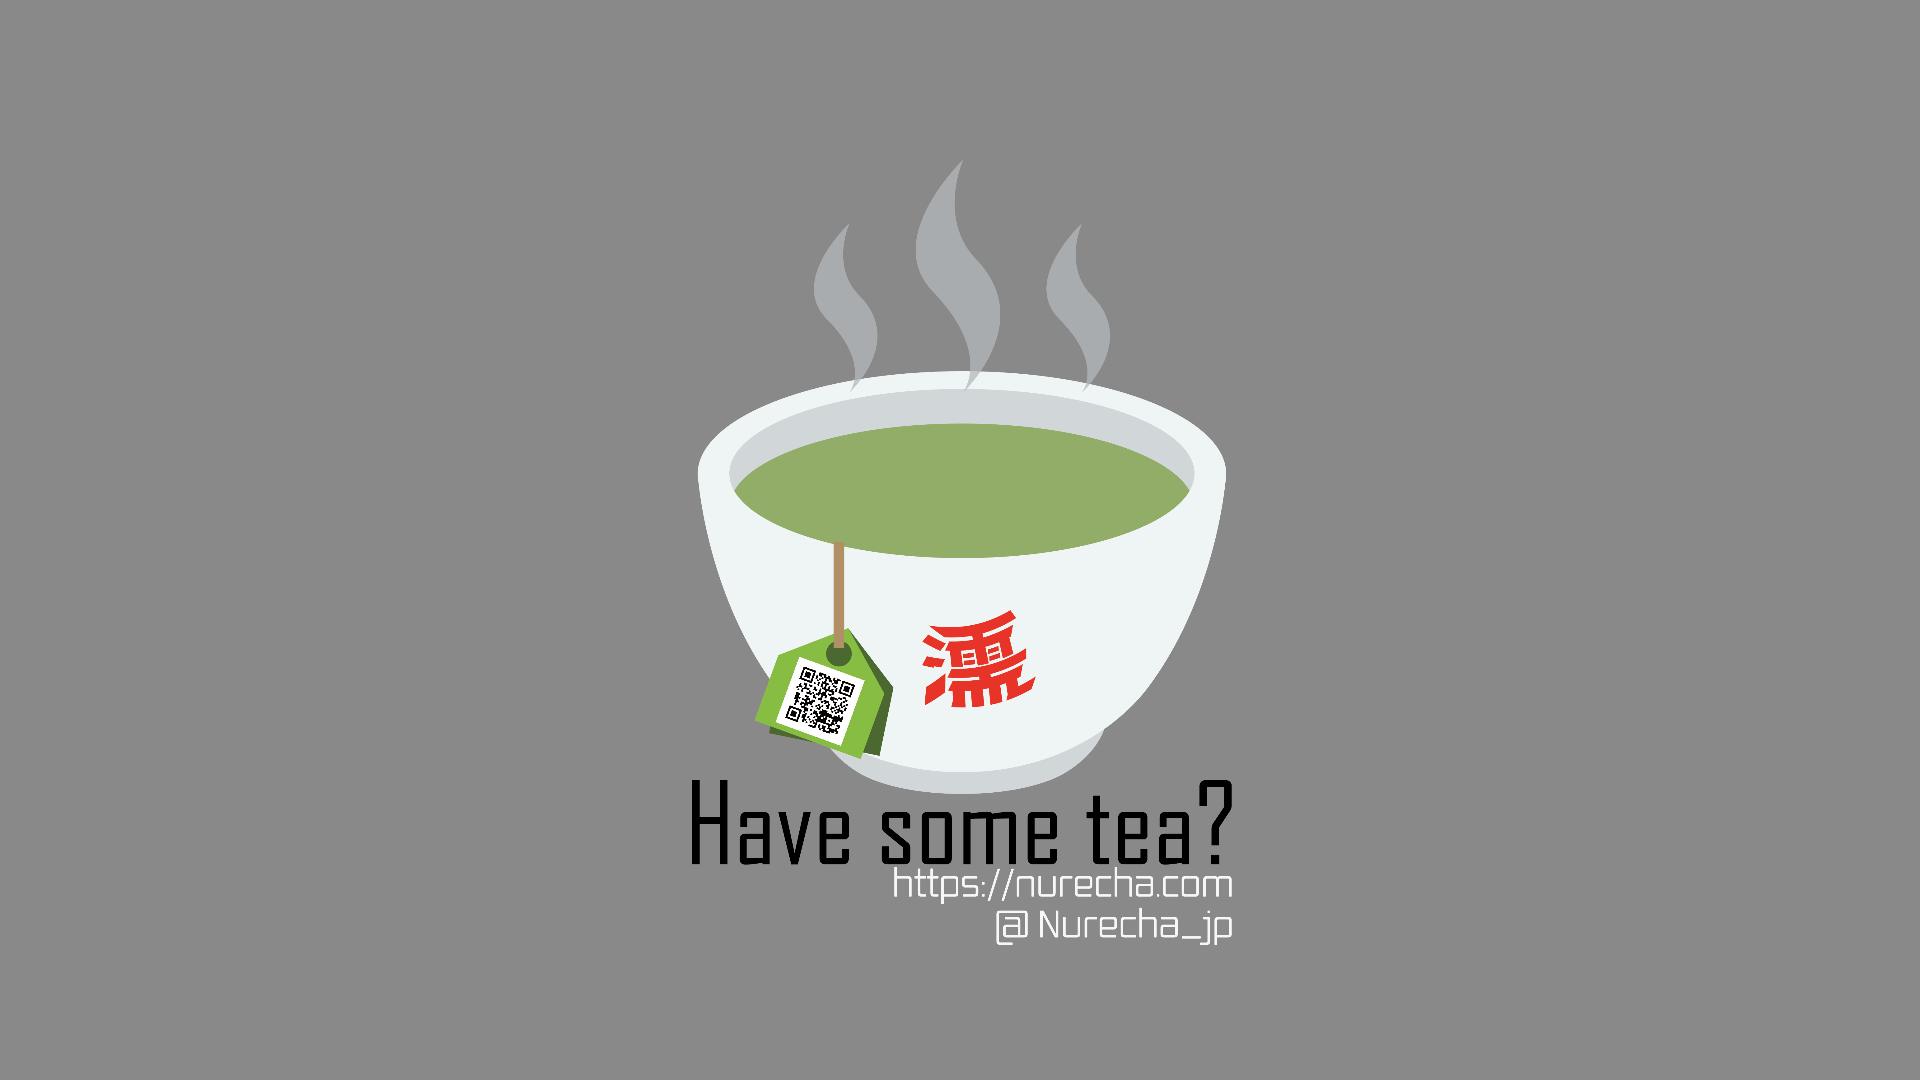 Have some tea?